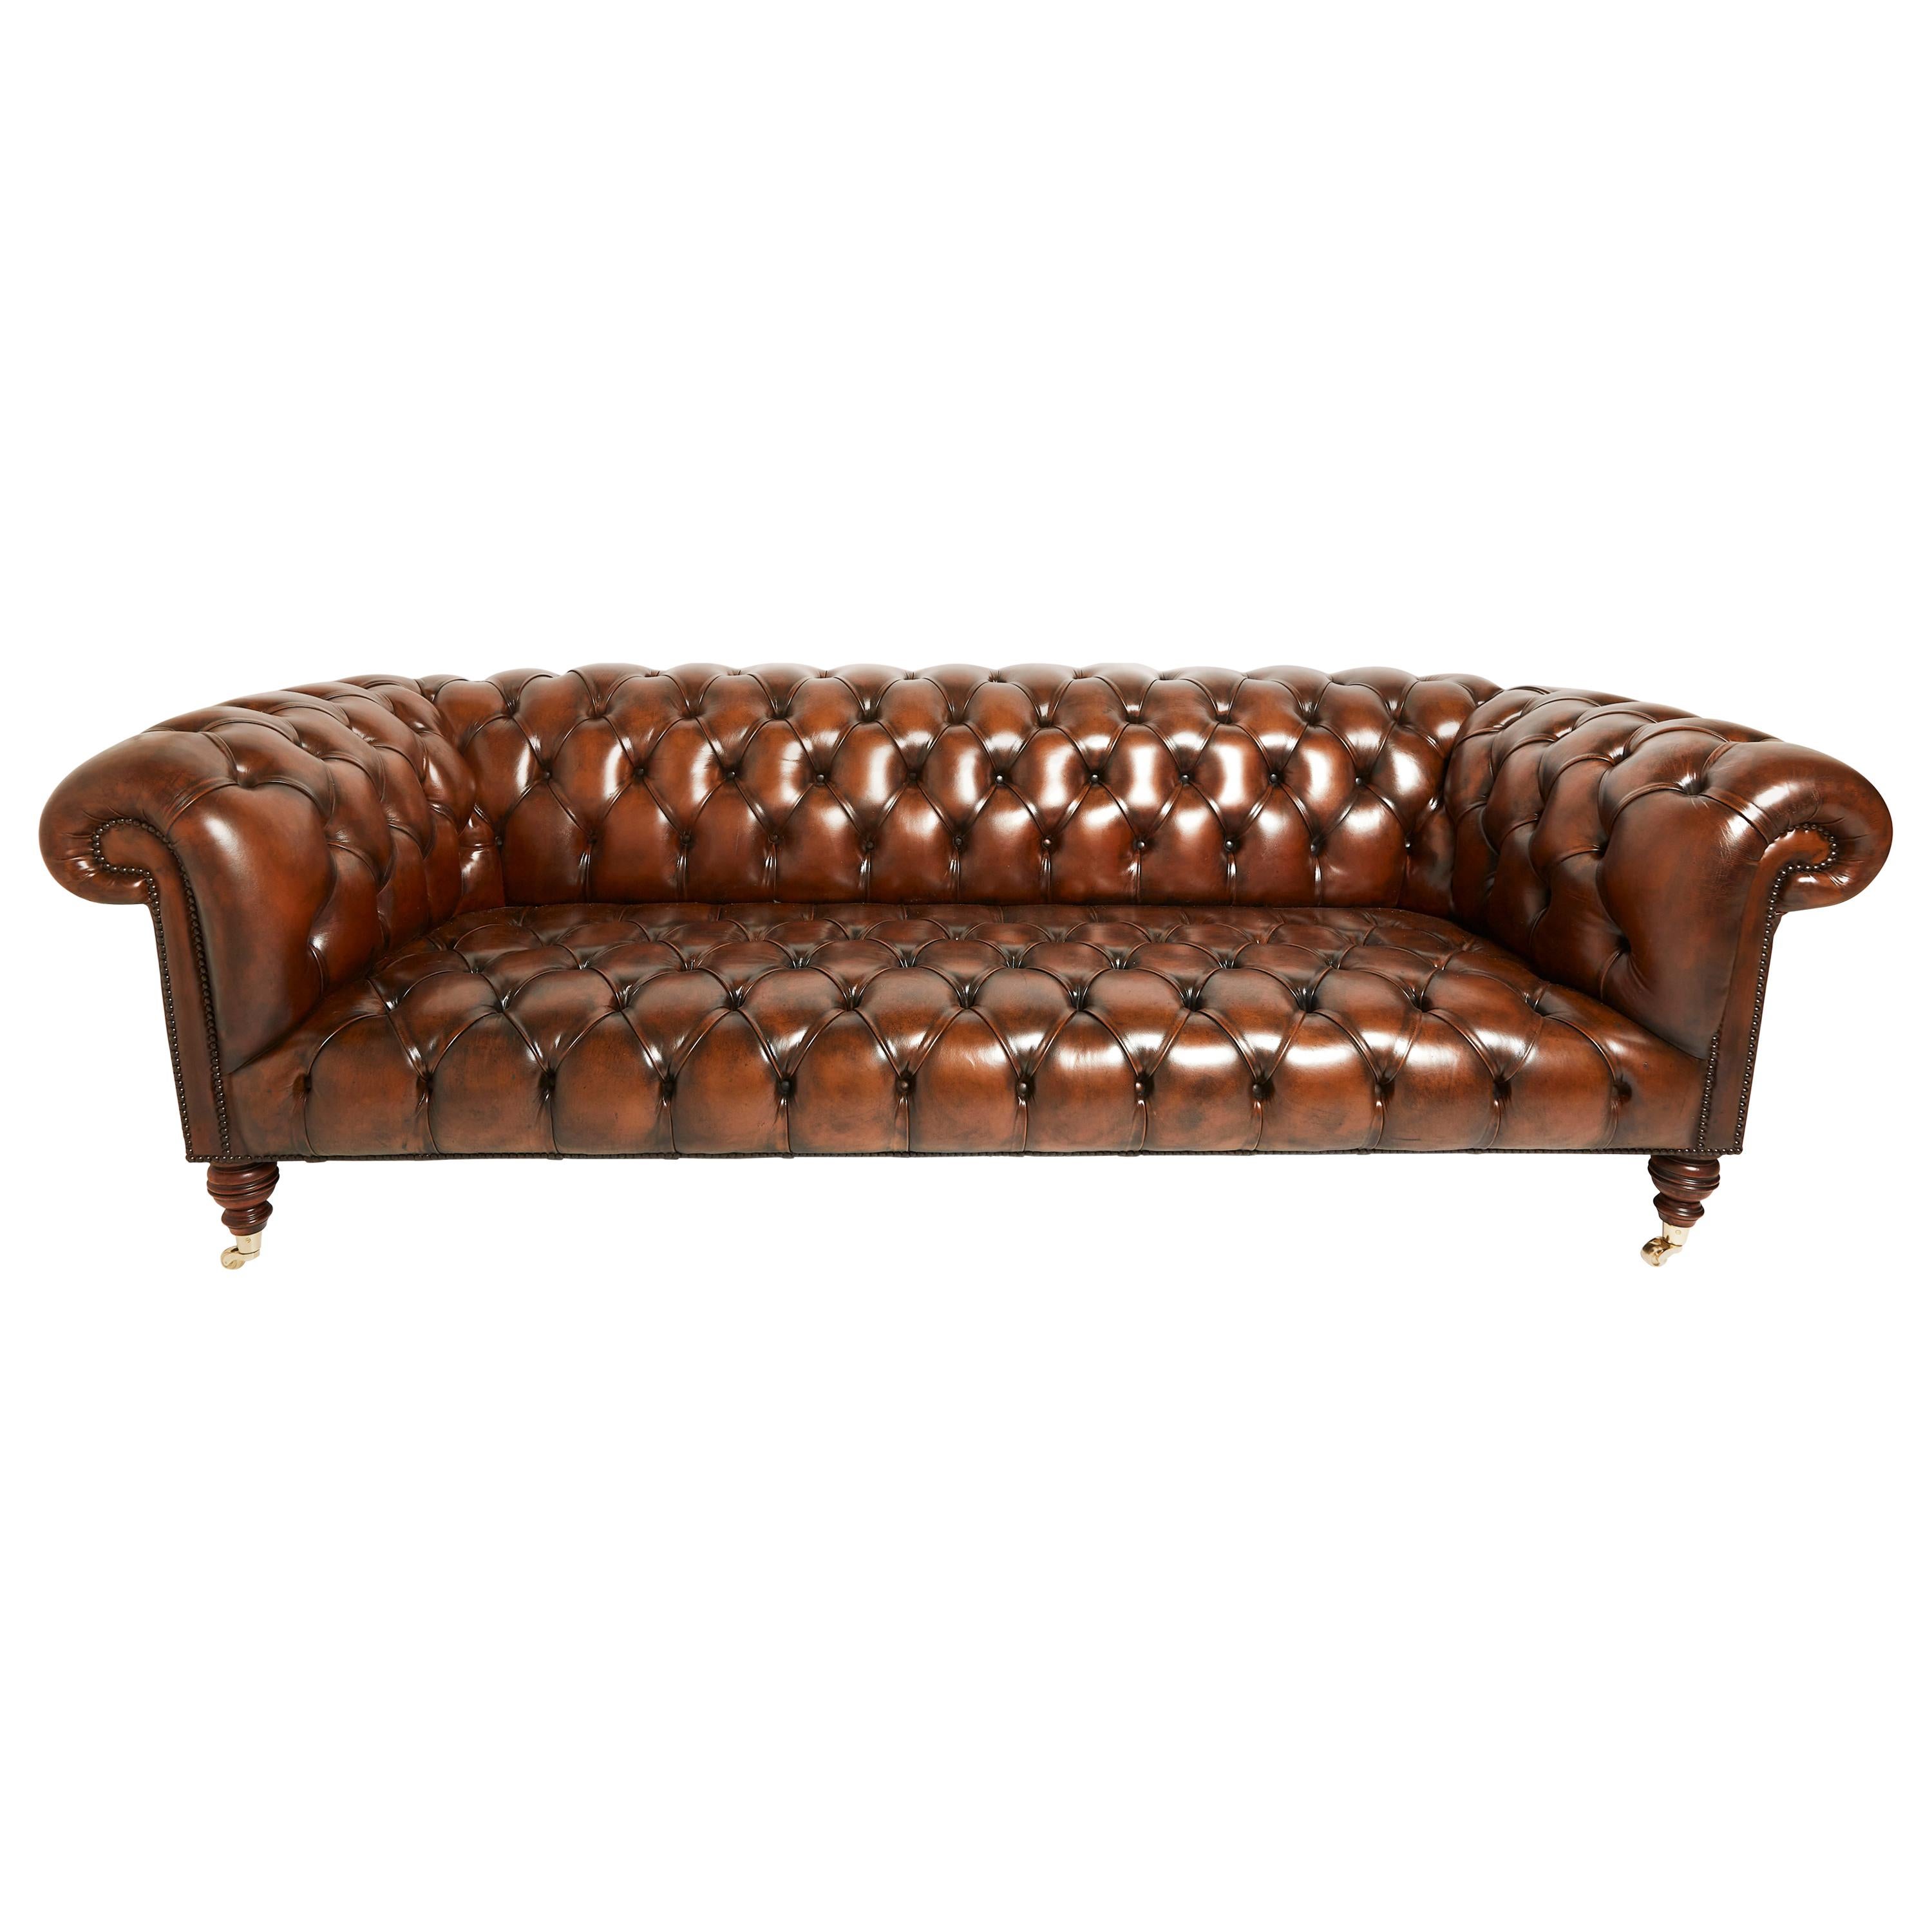 Superb Quality Classic English Chesterfield Sofa at 1stDibs | chesterfield  sofa sale, traditional english sofa, quality chesterfield sofa